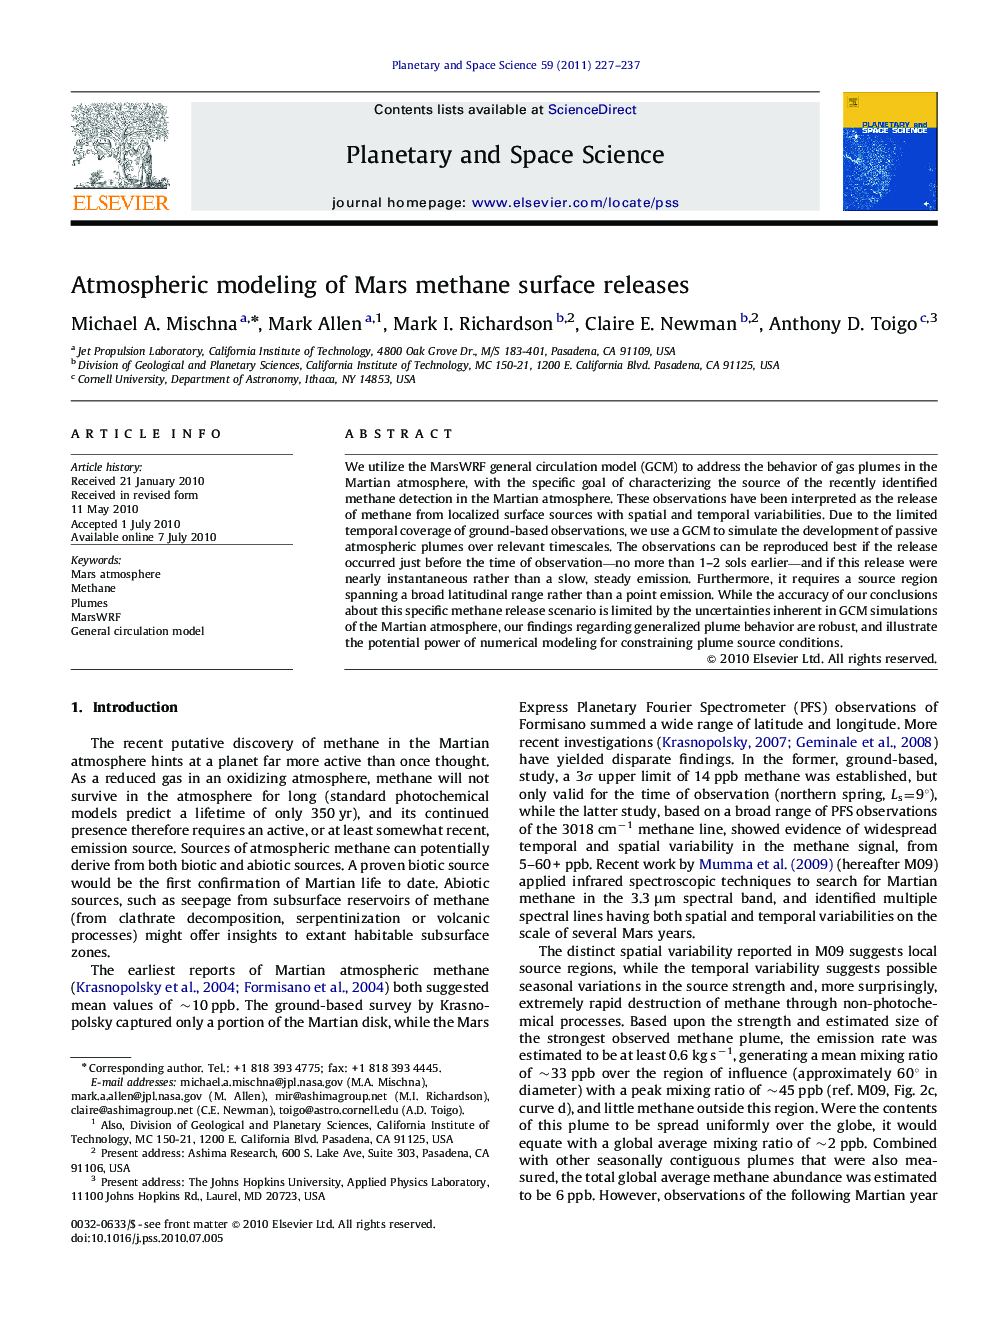 Atmospheric modeling of Mars methane surface releases